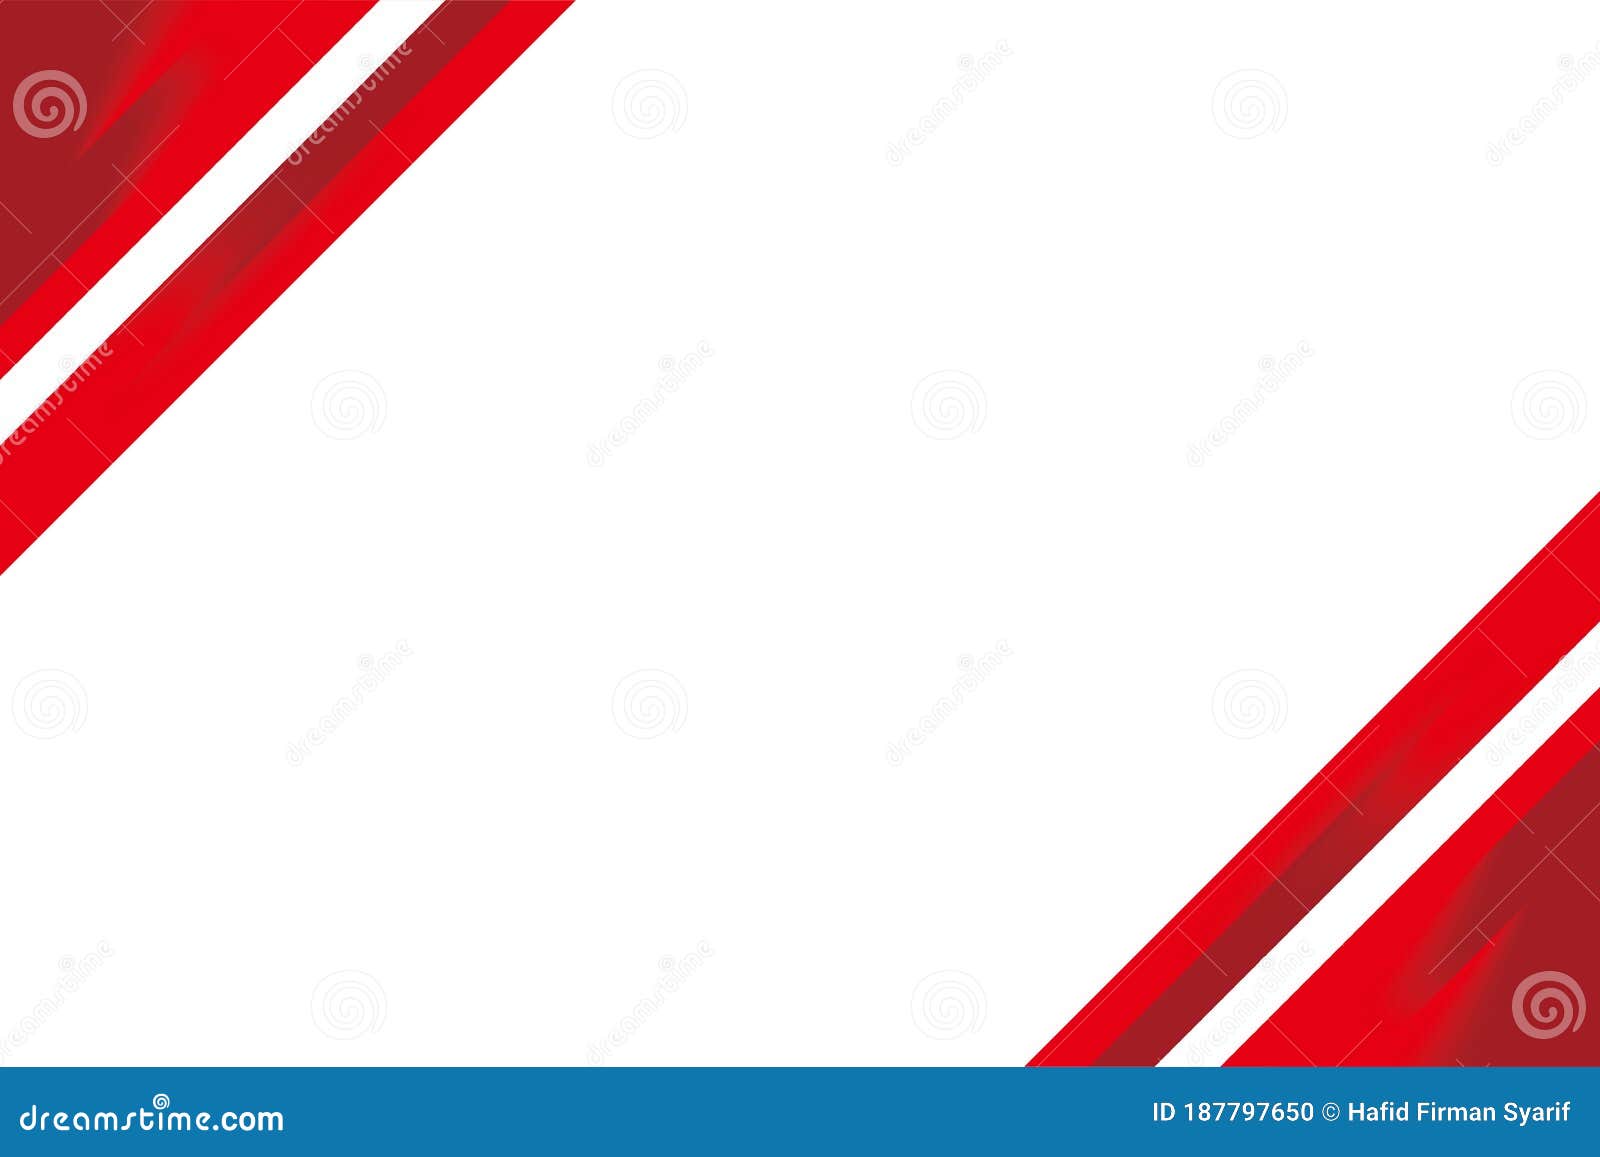 Red White Corner Background with Copy Space Stock Vector - Illustration ...